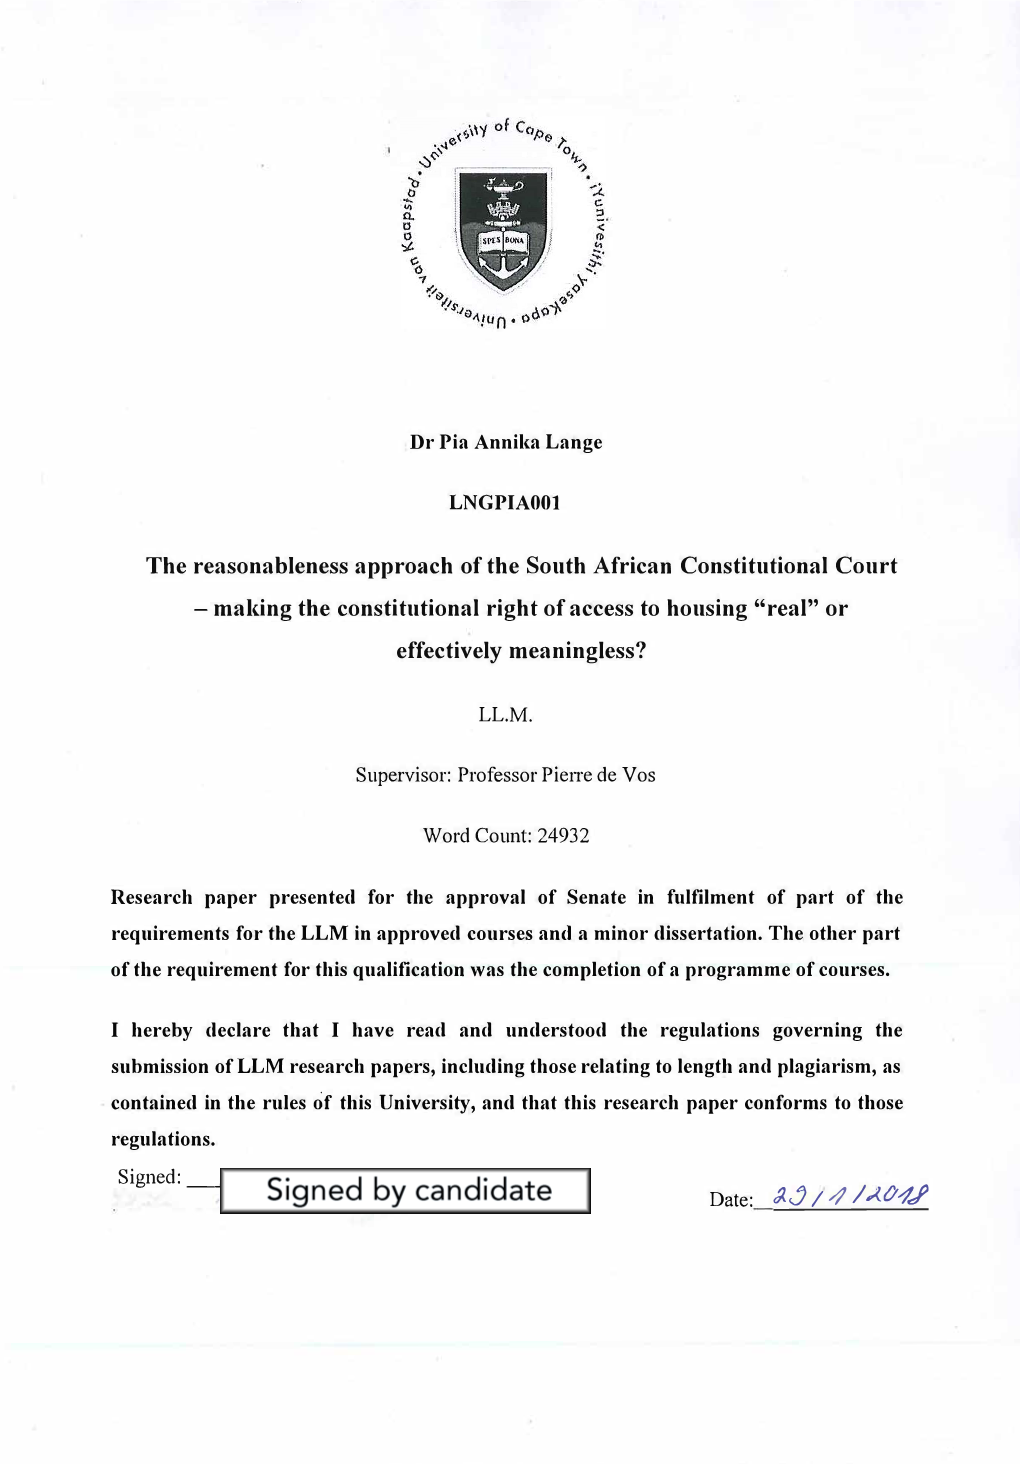 University of Cape Town (UCT) in Terms of the Non-Exclusive License Granted to UCT by the Author